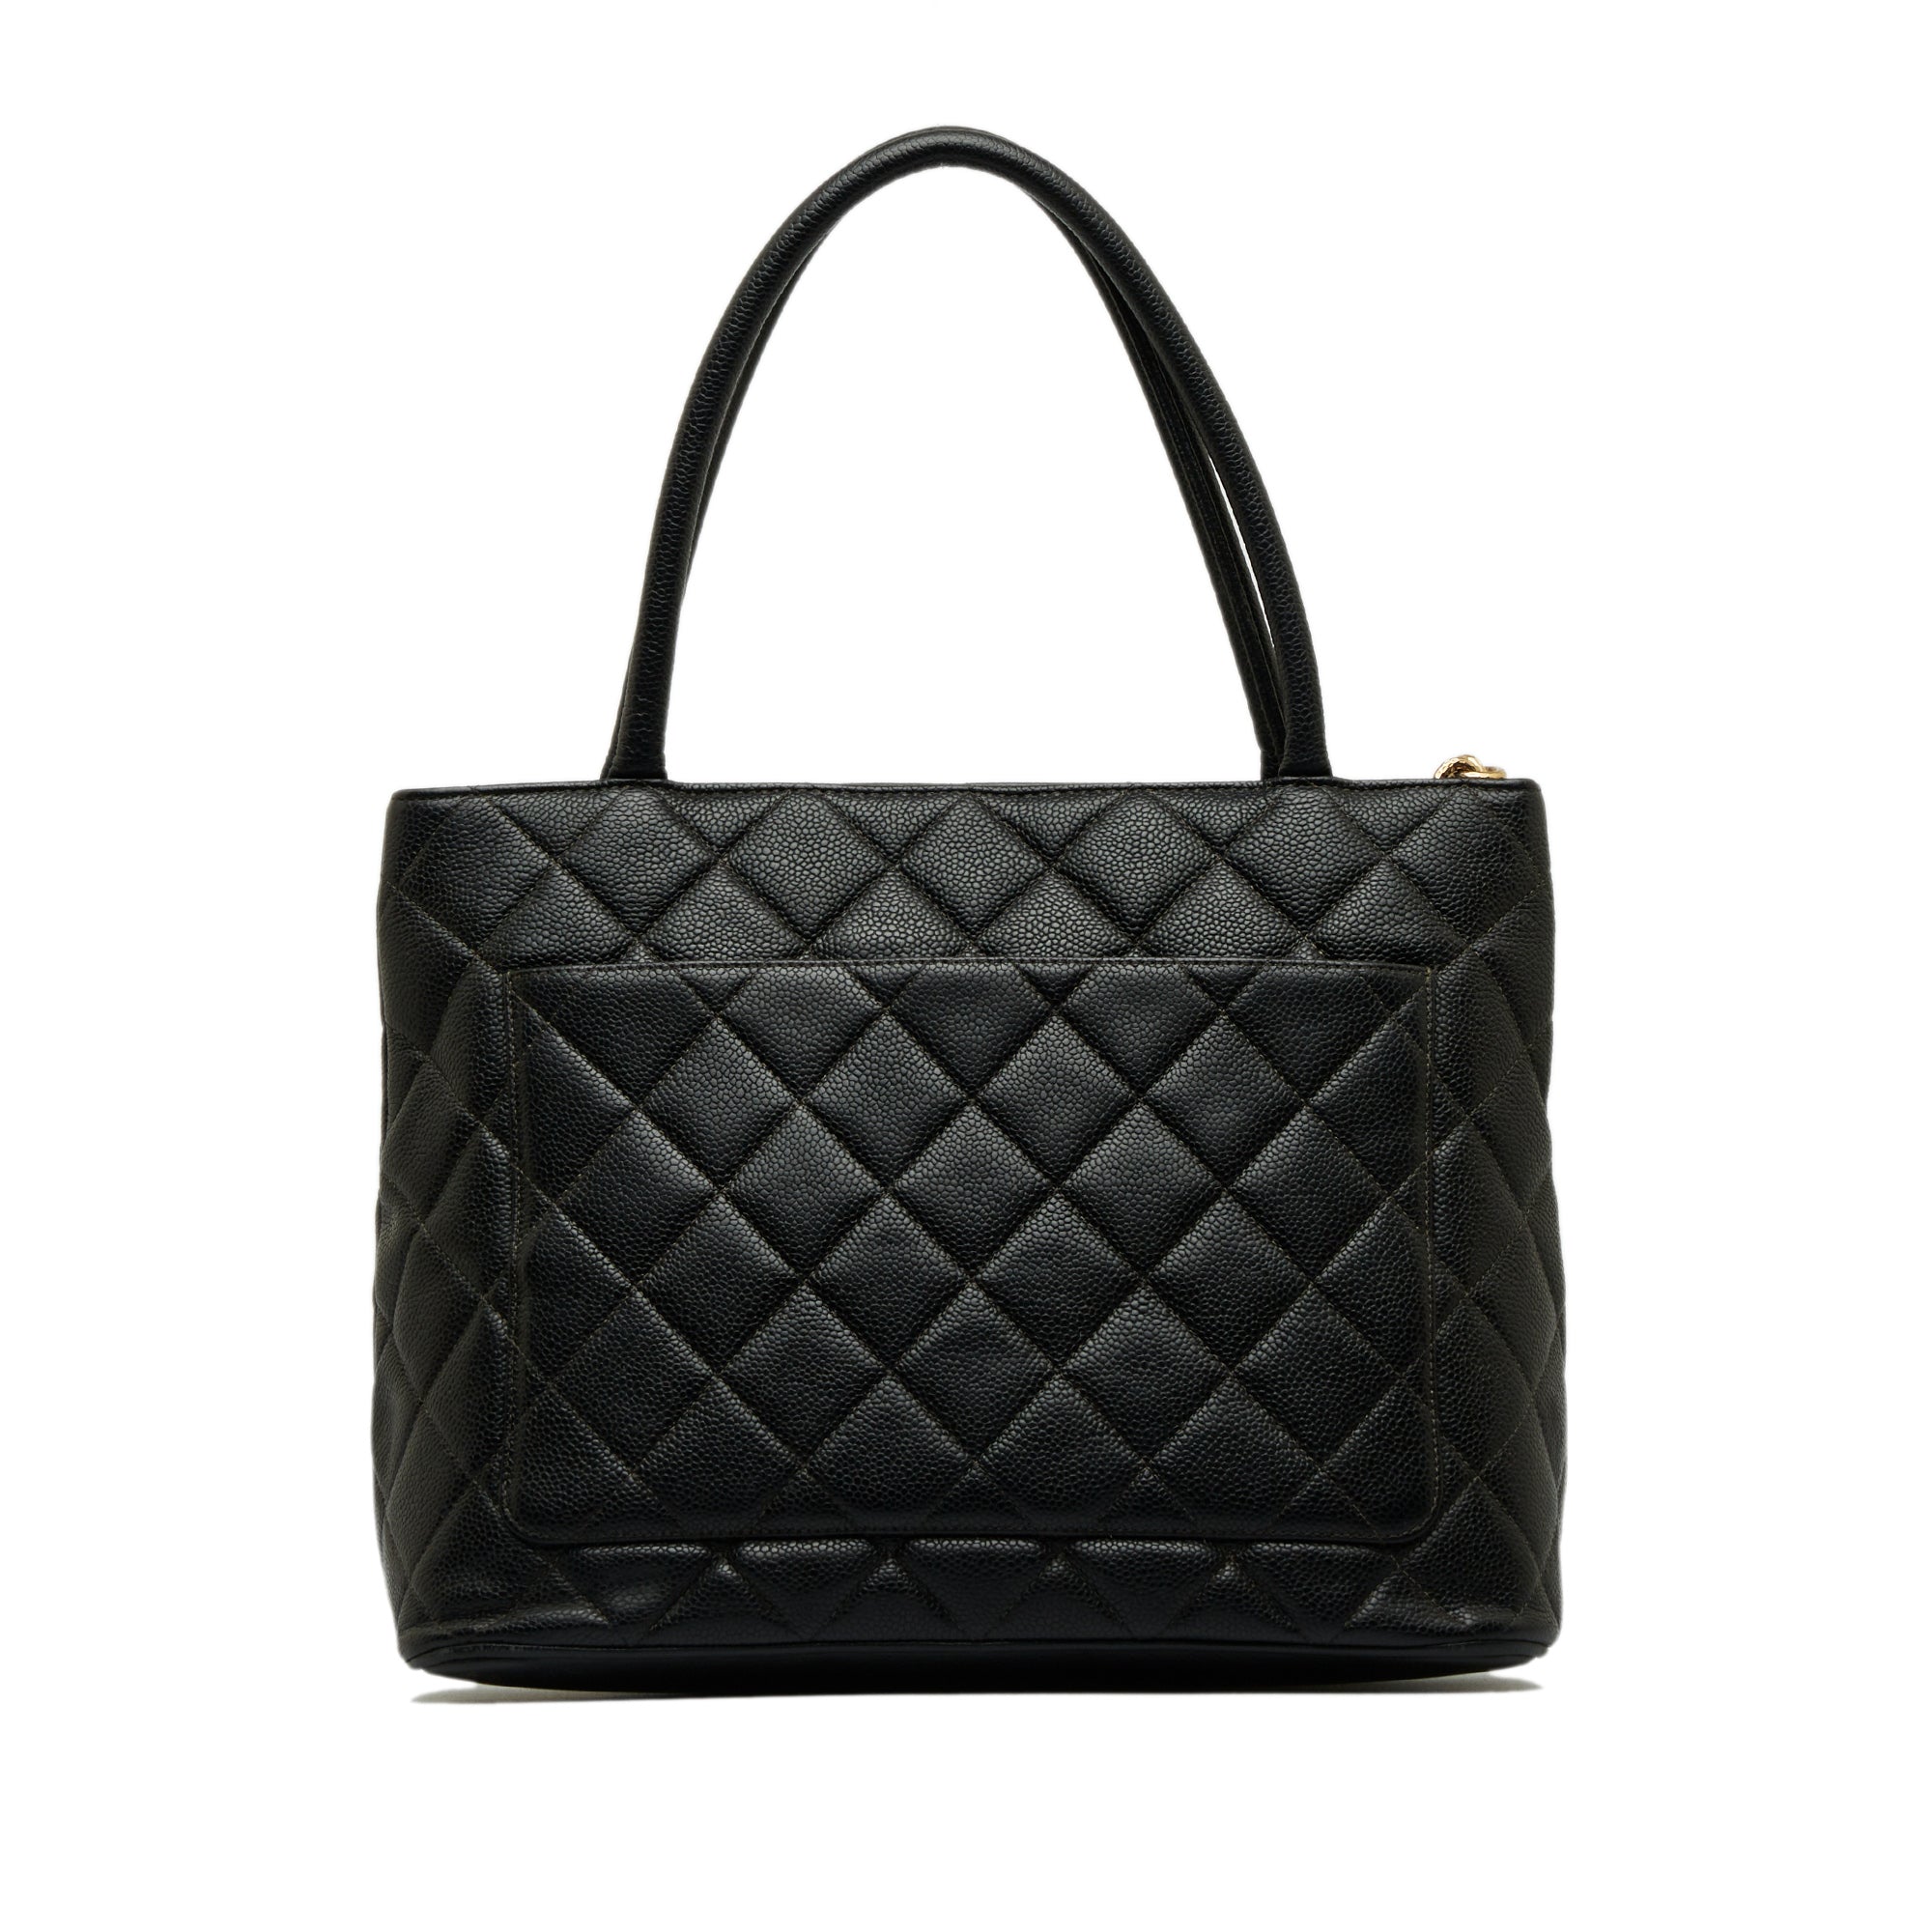 Chanel Quilted Caviar Leather Medallion Tote Bag